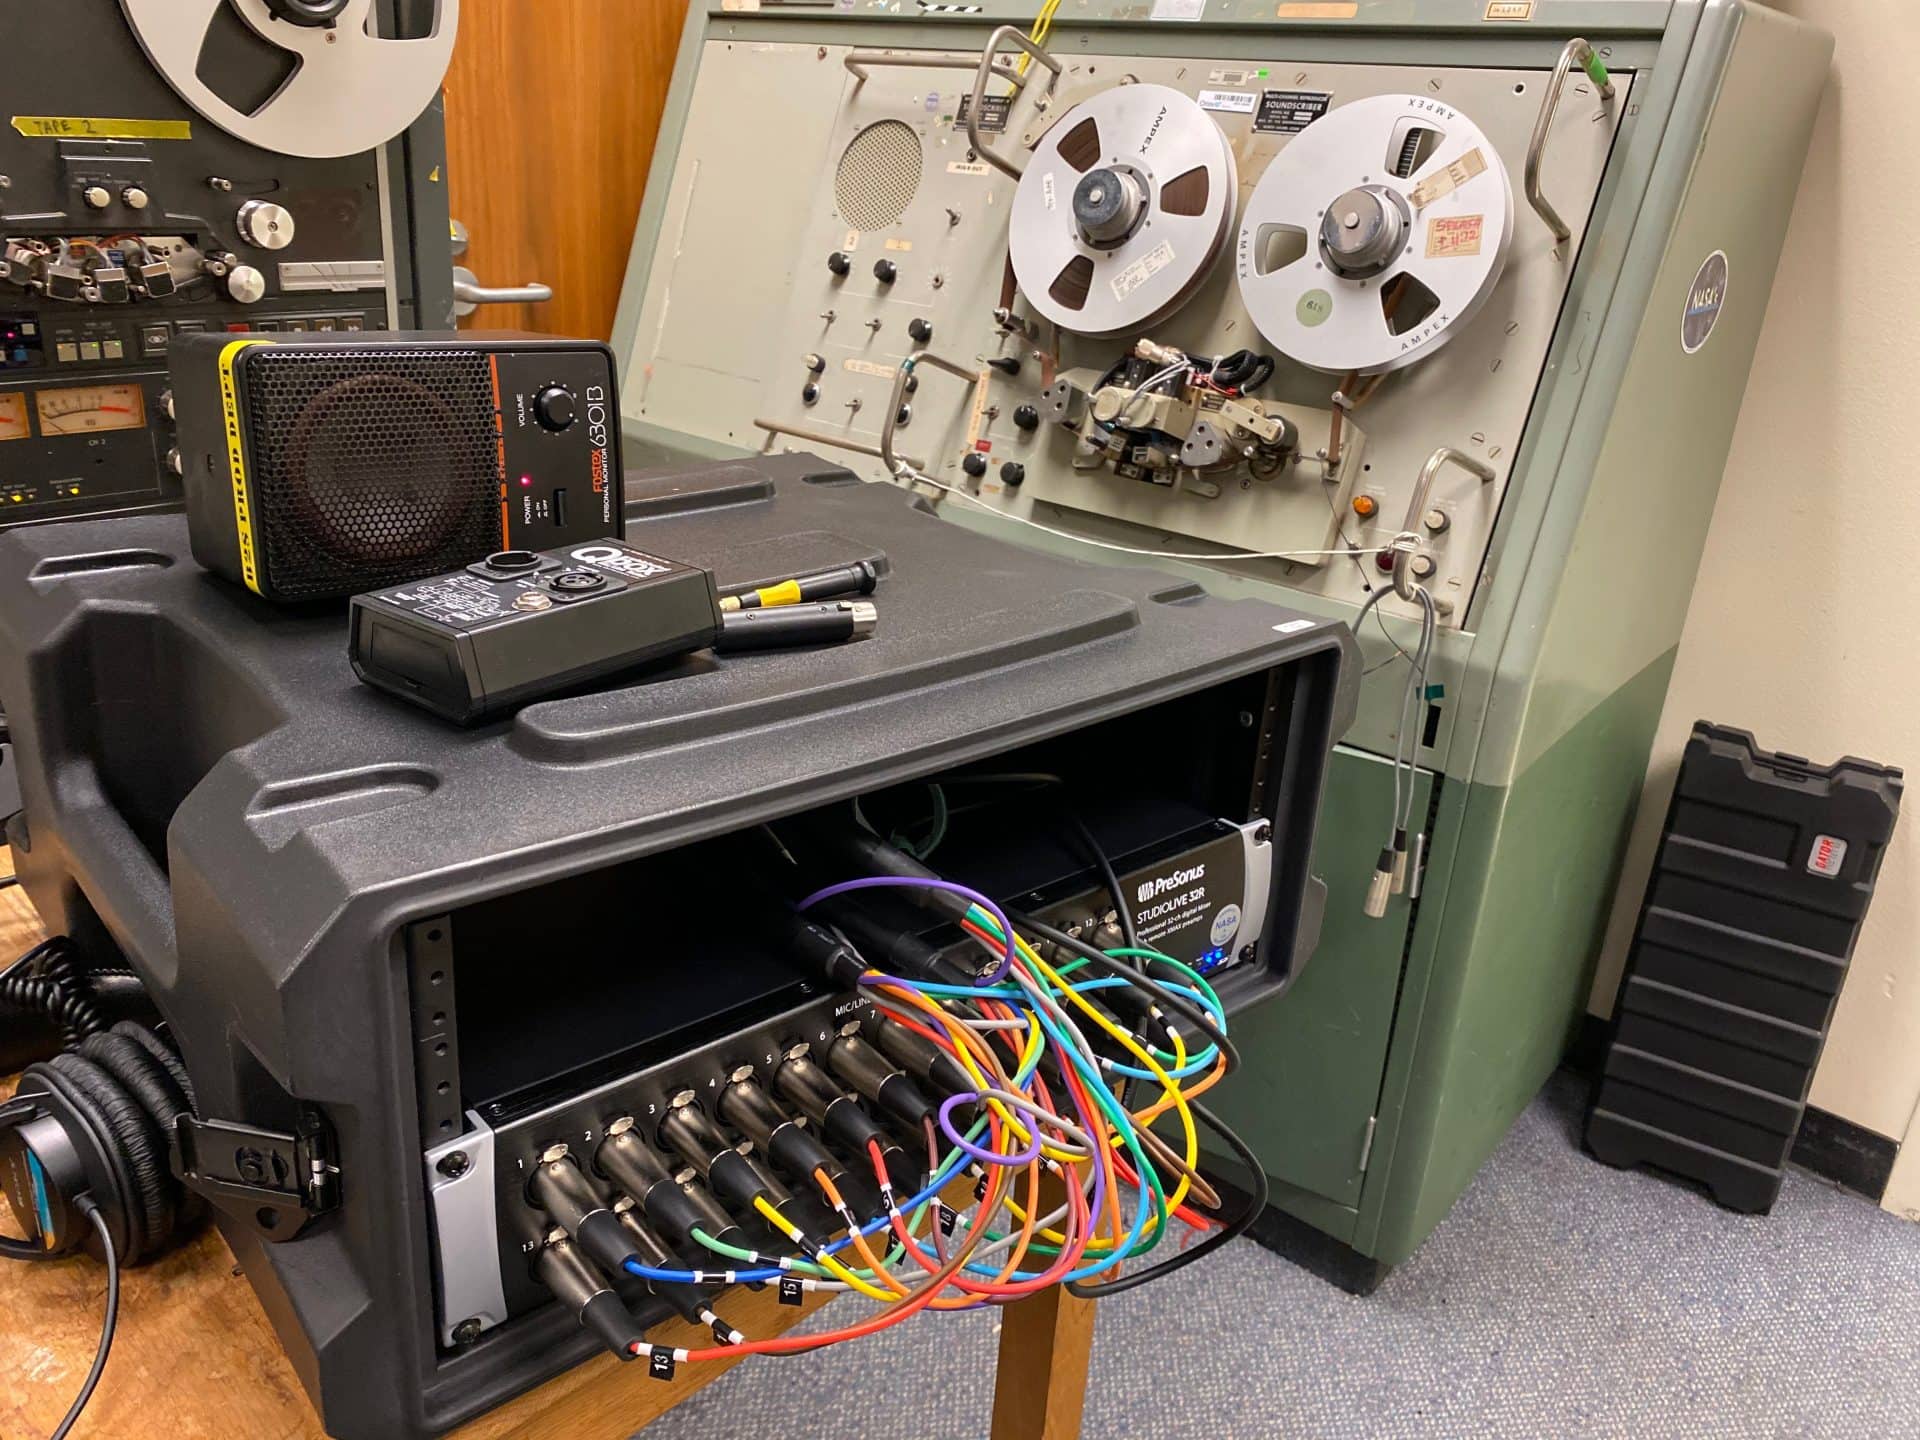 Large open reel audio tape recorder that Ben Feist used.